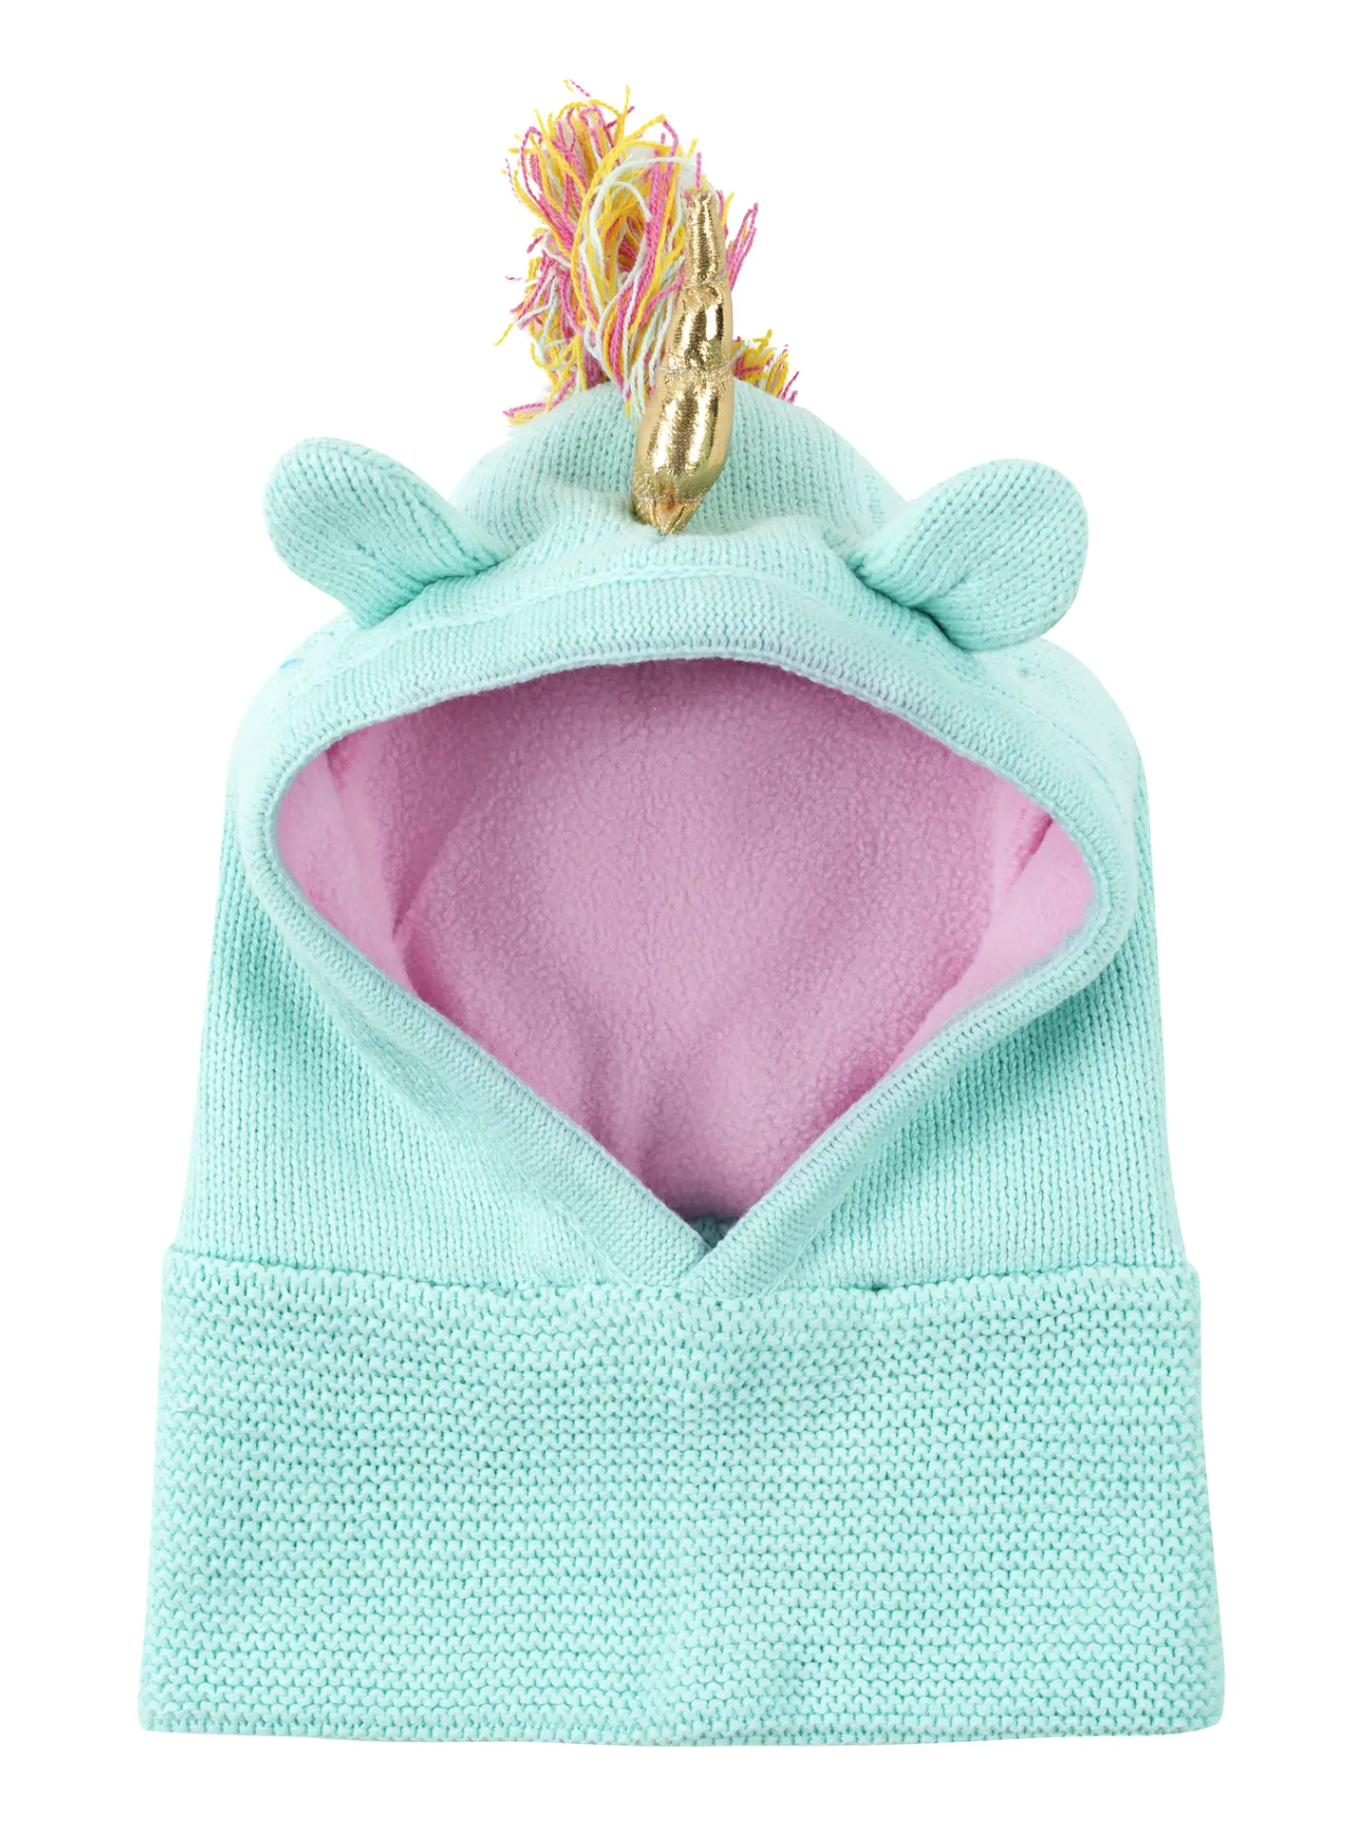 ZOOCCHINI BABY/TODDLER KNIT BALACLAVA HAT - ALLIE THE ALICORN-12-24 months